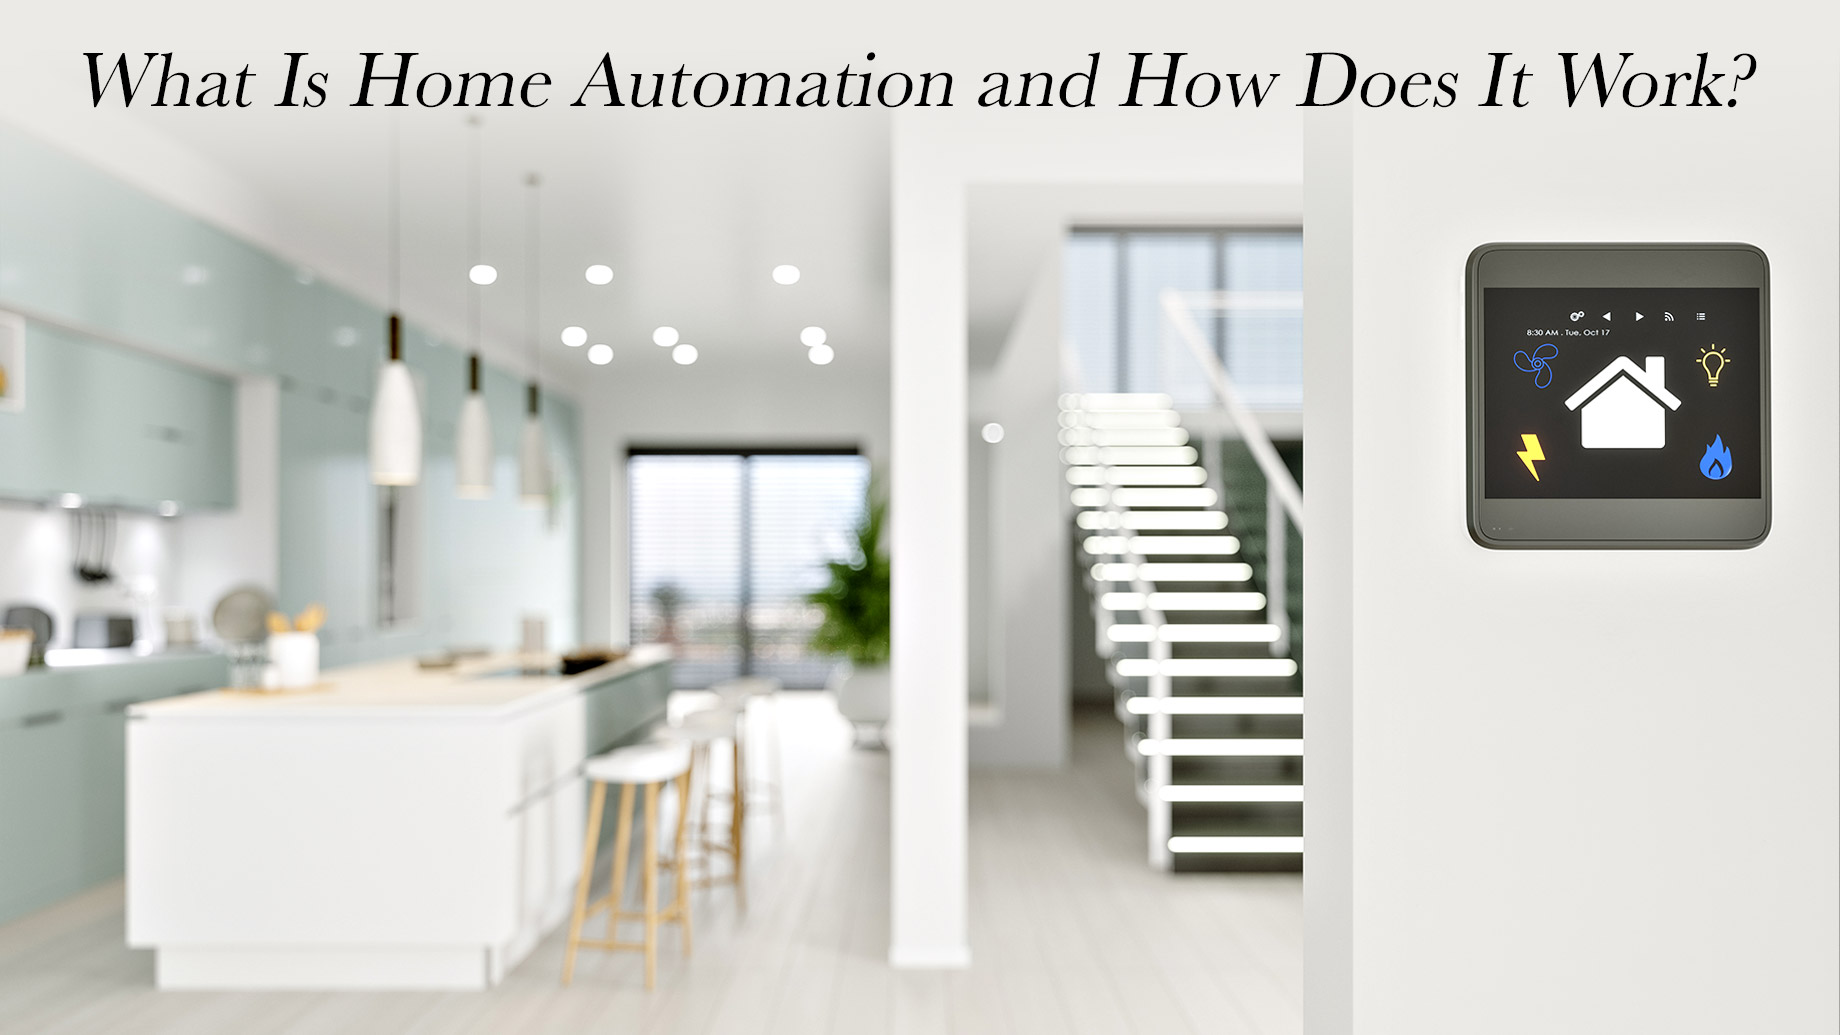 What Is Home Automation and How Does It Work?